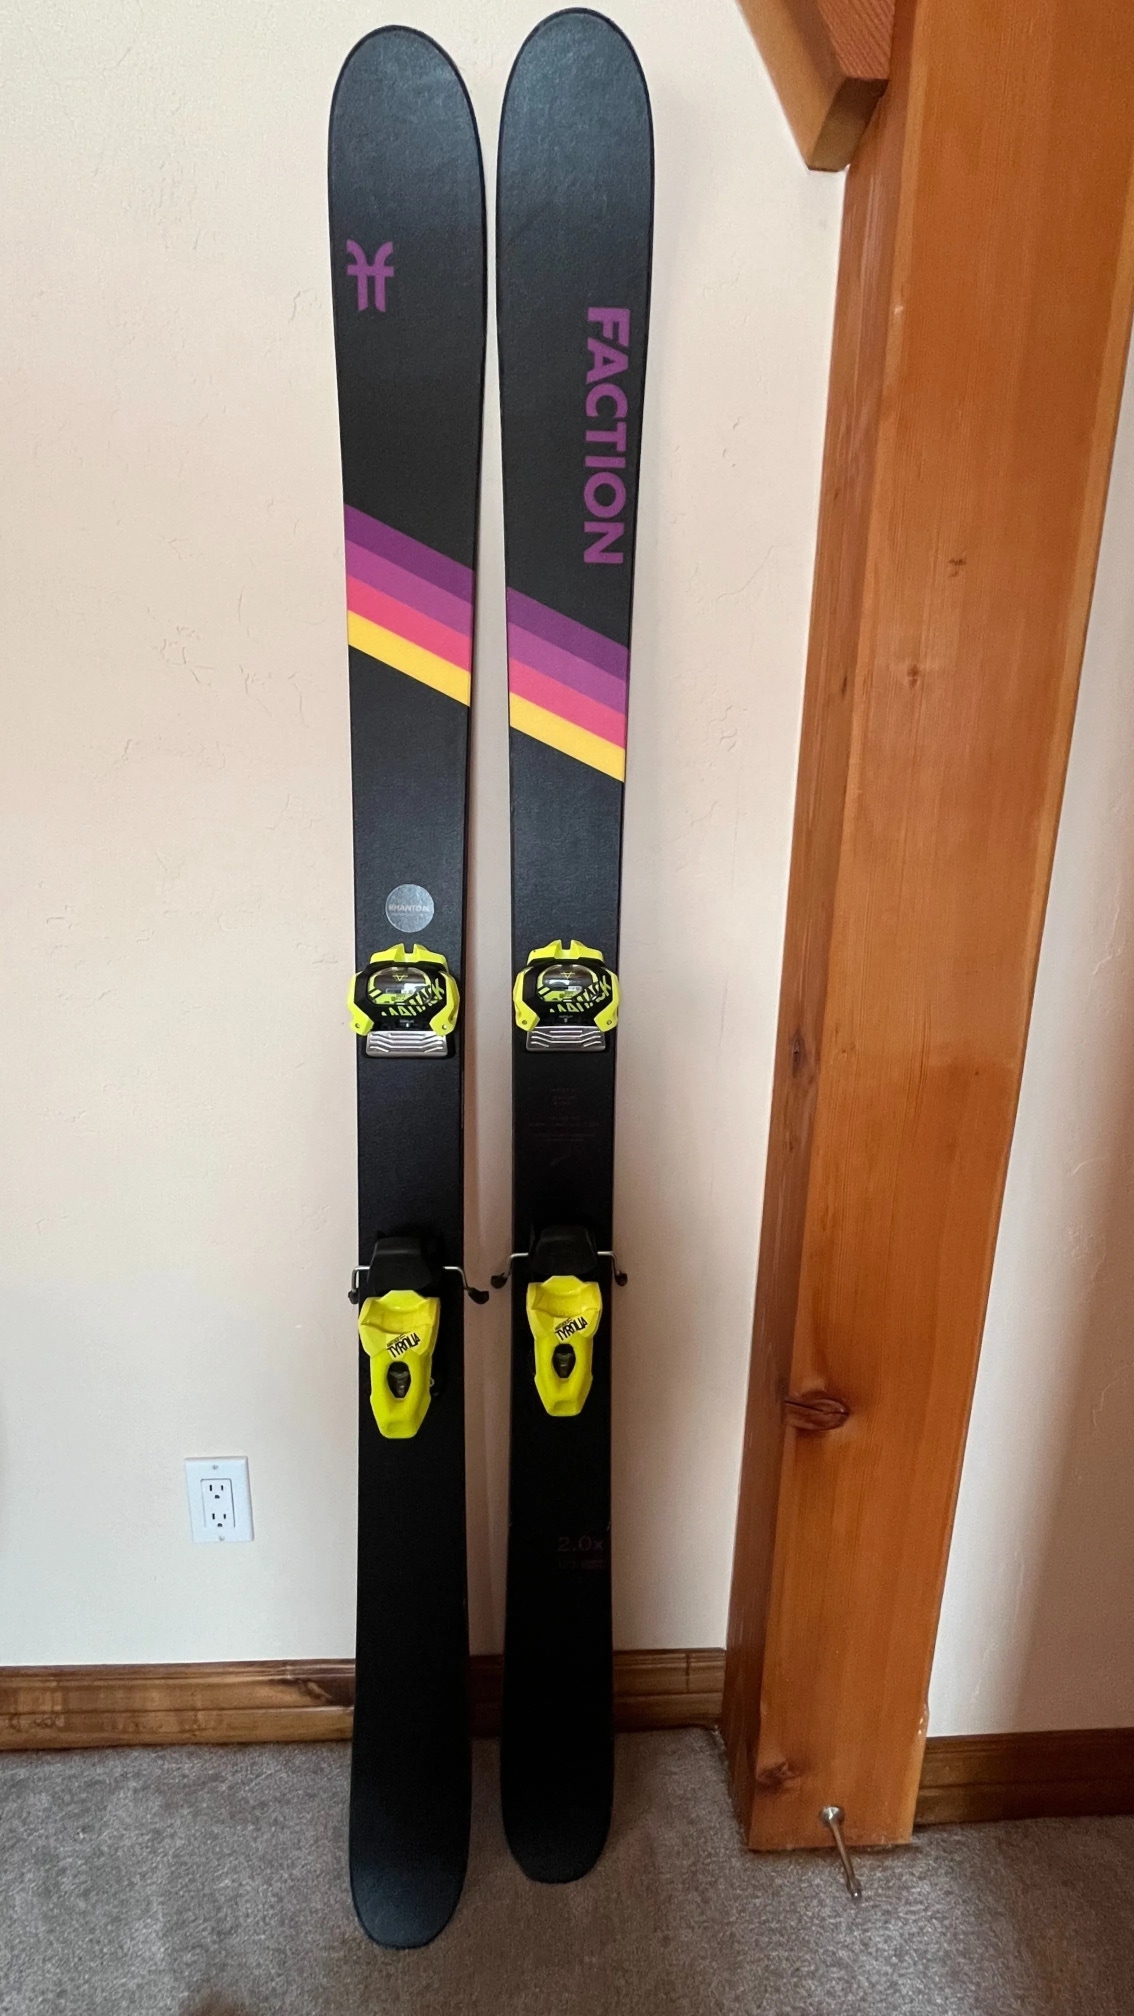 Faction Candide 2.0X Skis 2021 173cm with Tyrolia Attack Bindings and Phantom Base Glide